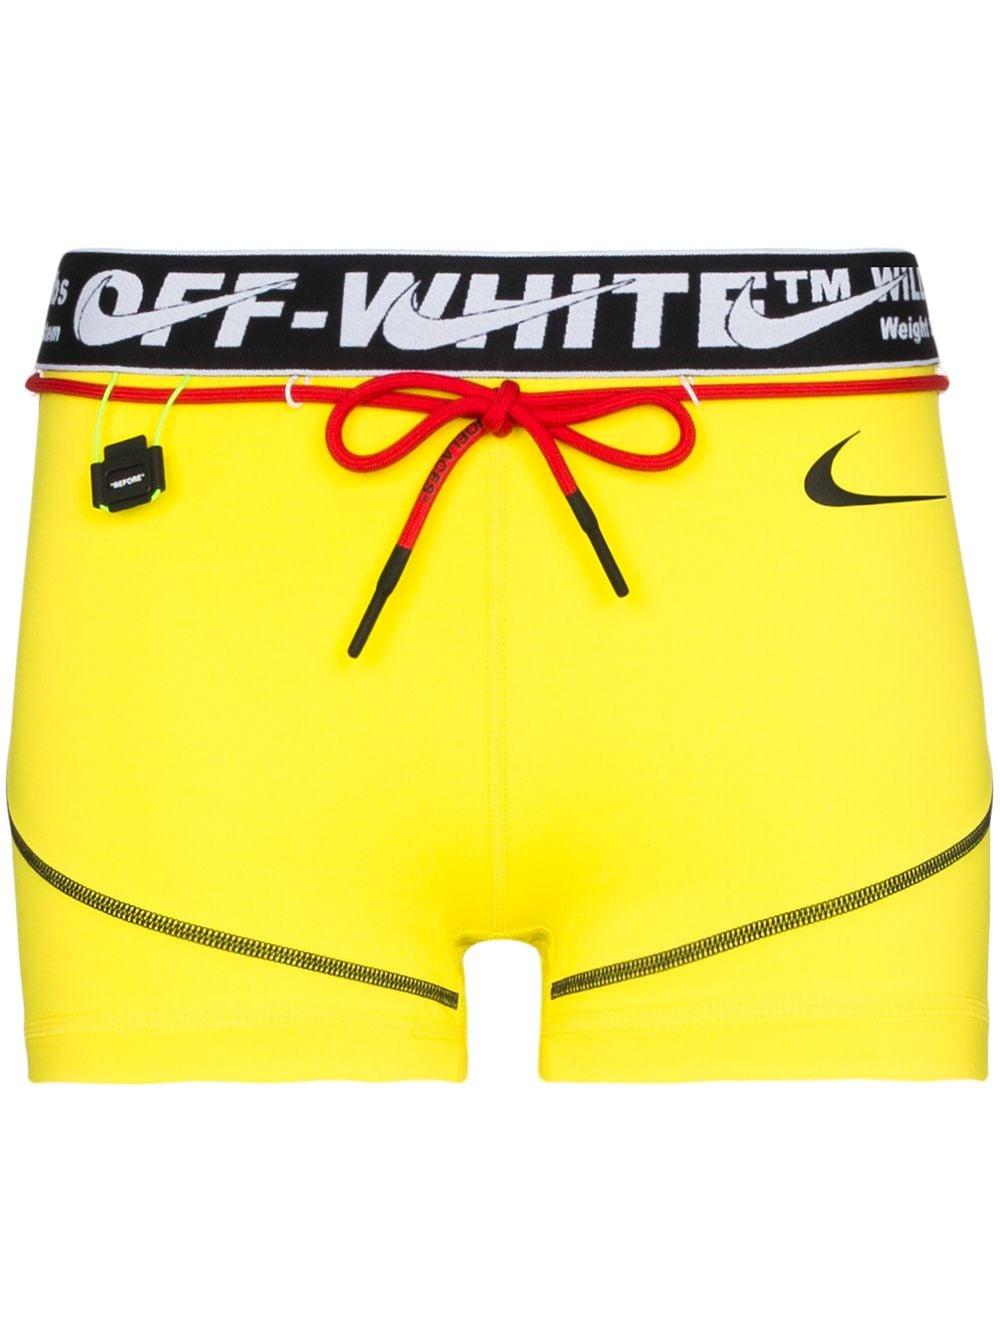 Nike X Off-white Running Short W in Yellow - Save 6% - Lyst